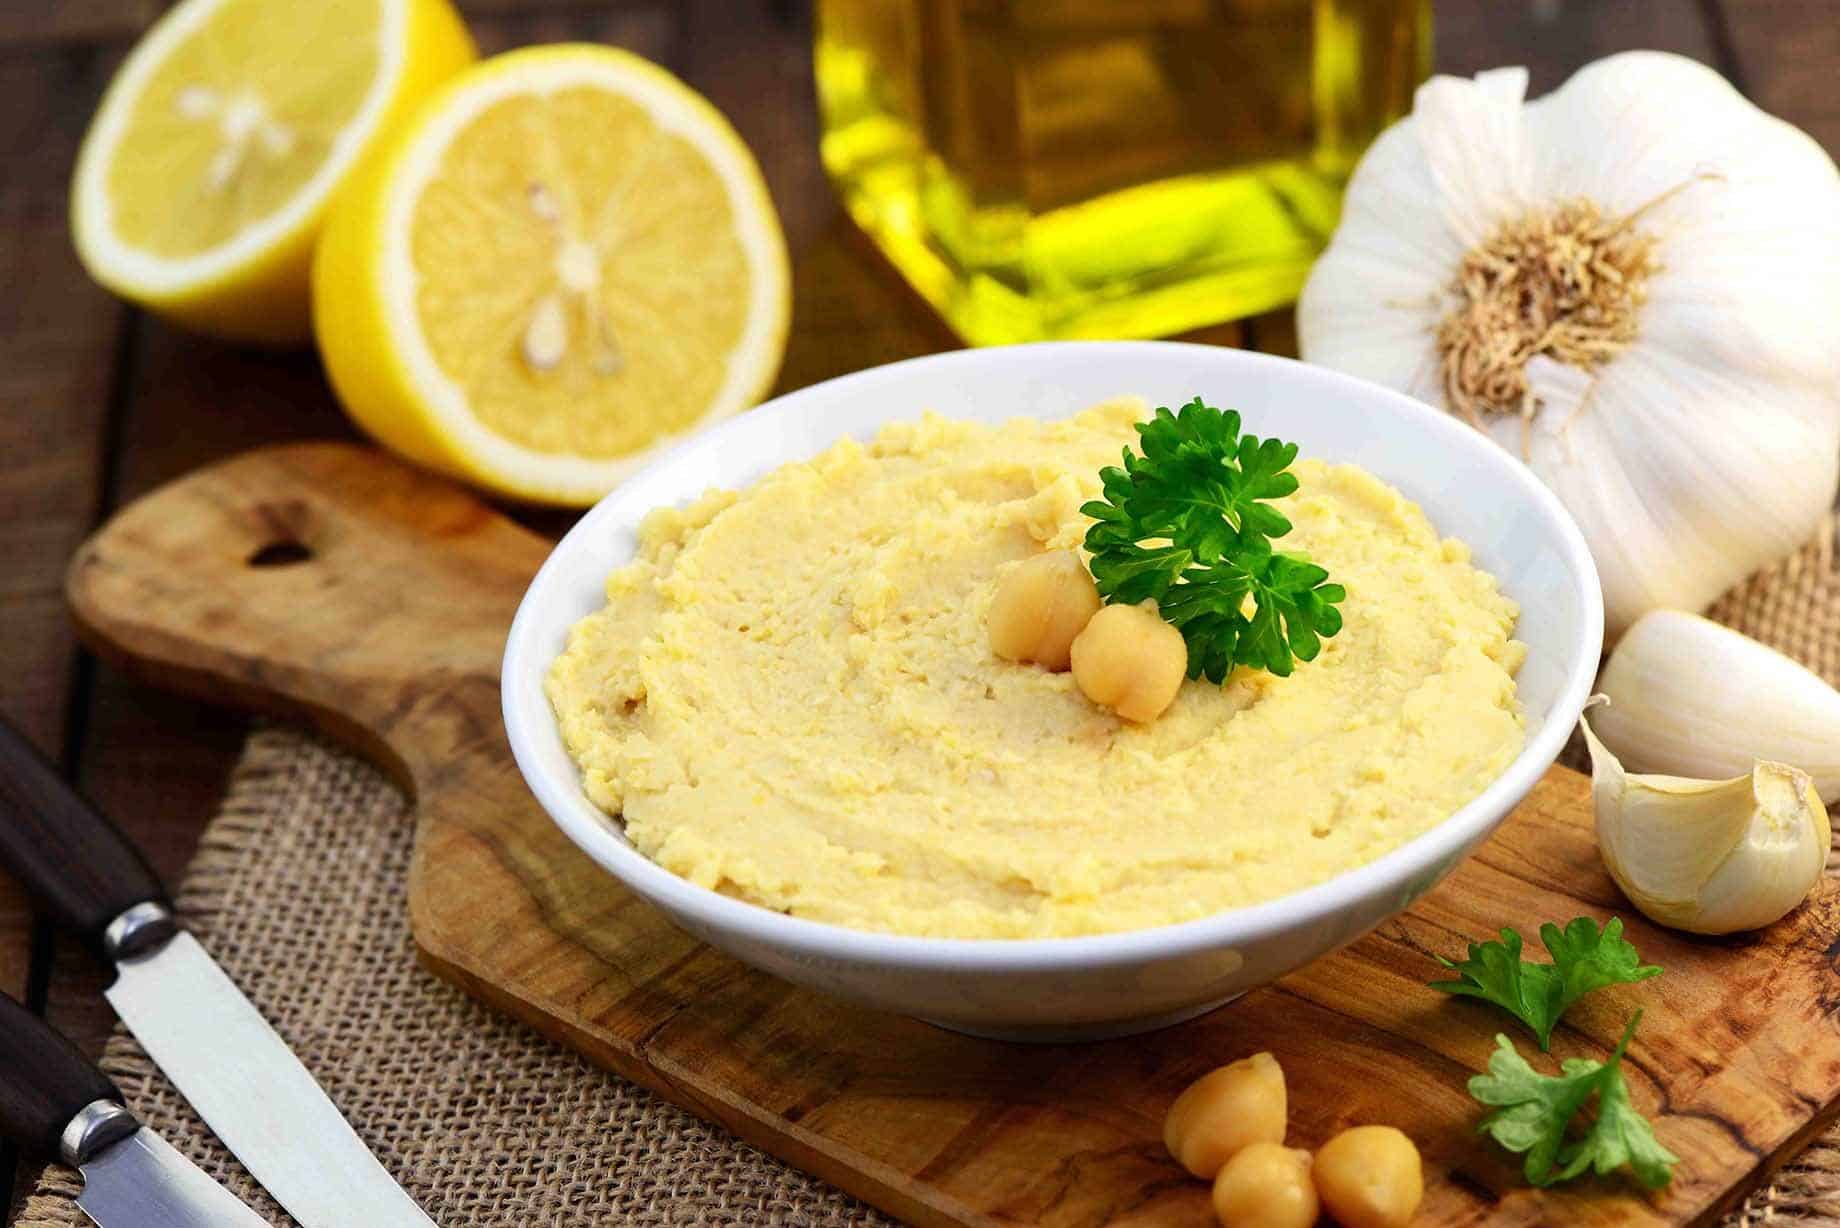 hummus 2 - Oil-Free Hummus Recipe Roundup: All the Flavor Without the Added Fat